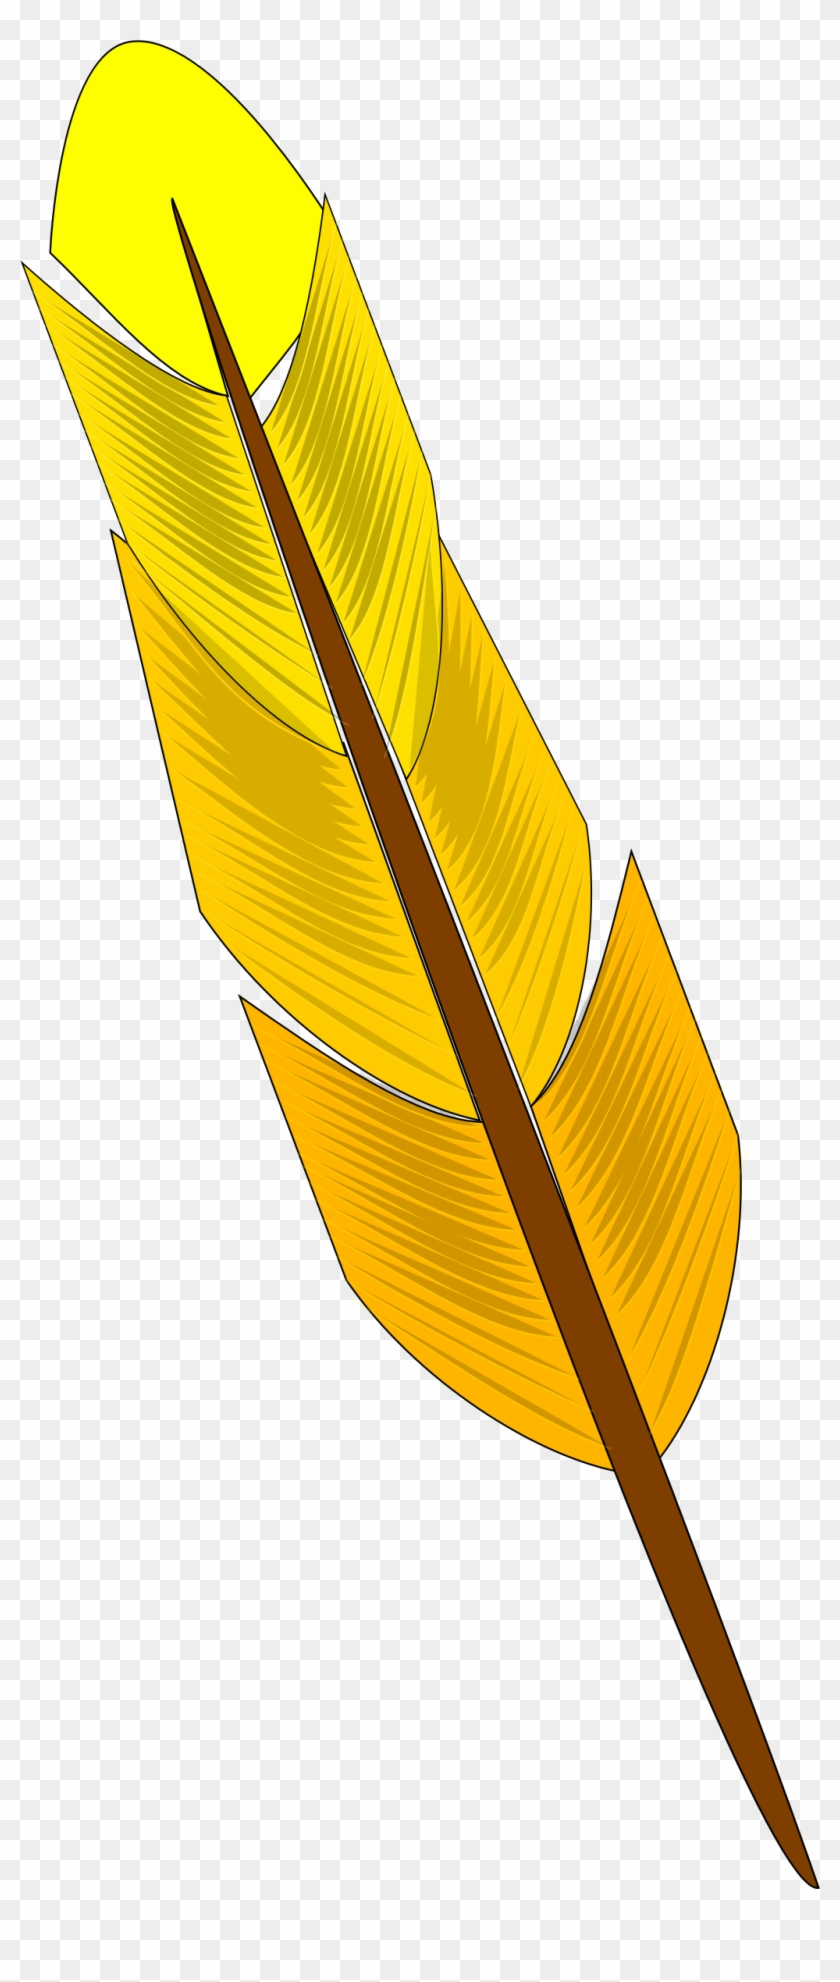 Feather Clipart Orange - Yellow Feather #306156